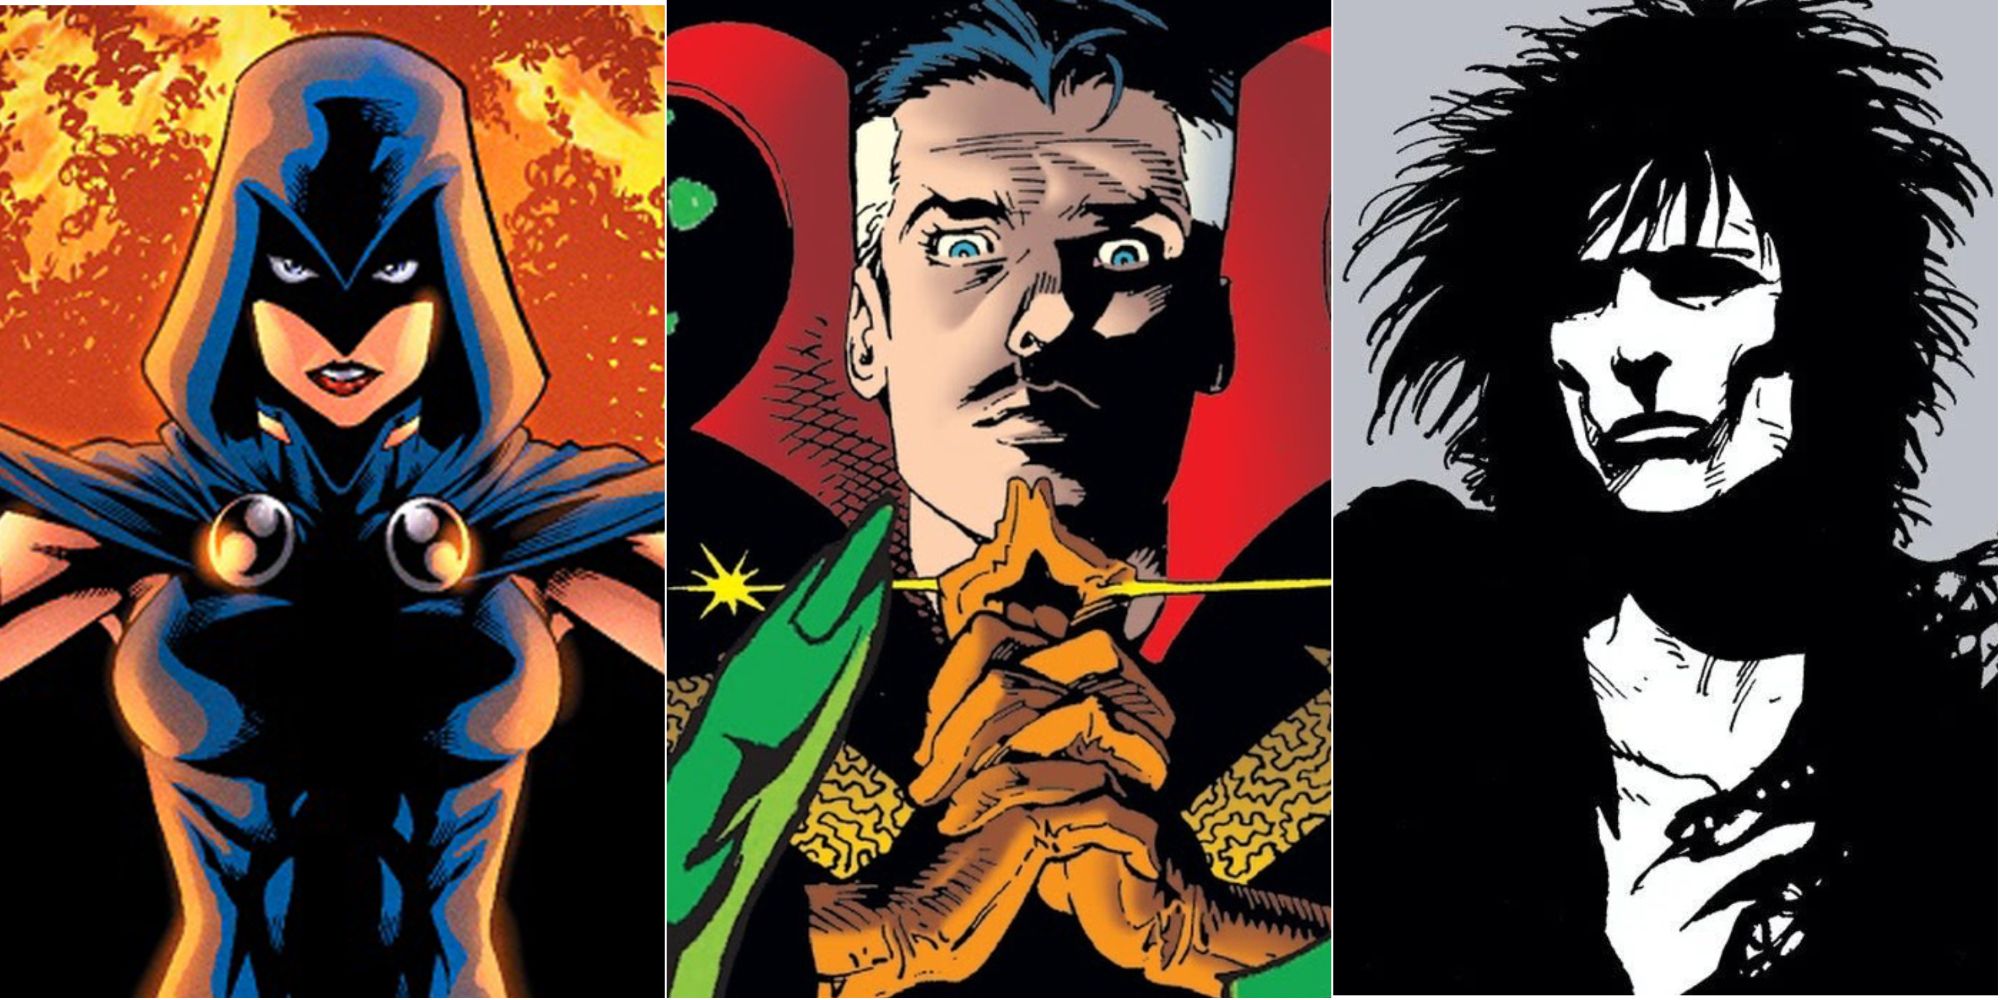 Three famous wizards from comic books